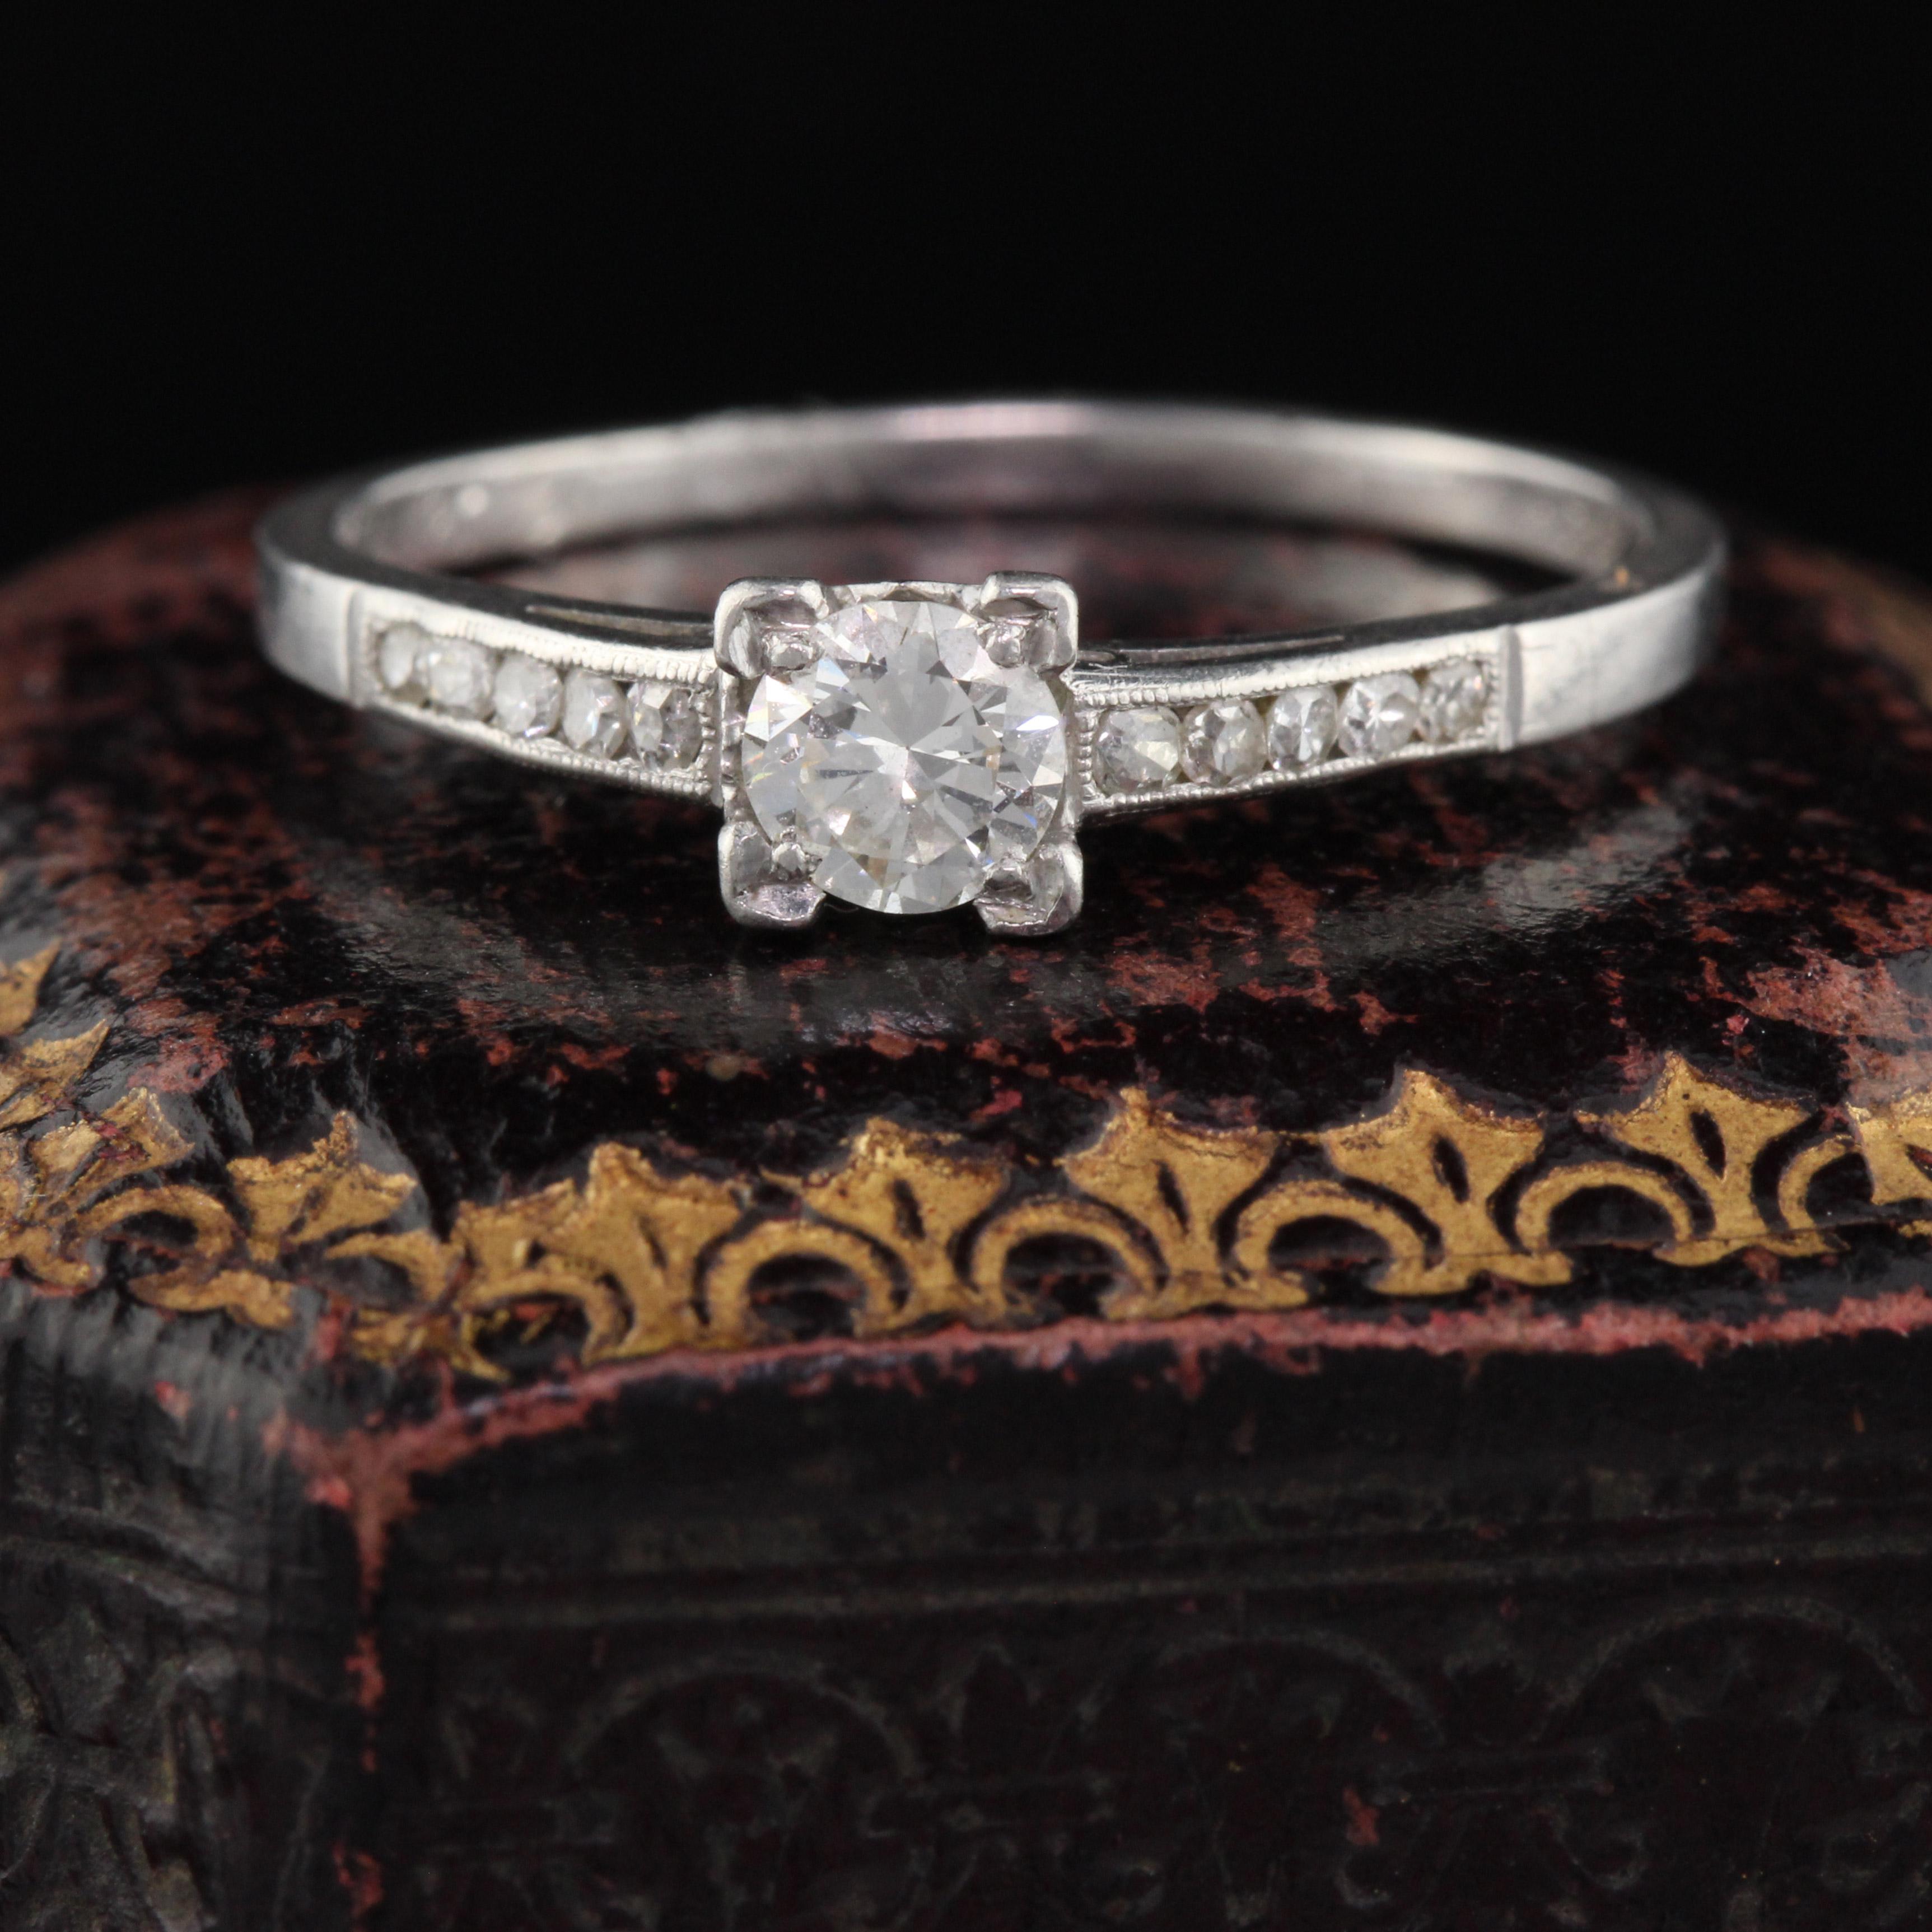 This is an eternally classic engagement ring from the 1930's in platinum with a round diamond in the center and five small round diamonds on either side. The inside of the shank is engraved but has been faded. Parts of the engraving are still